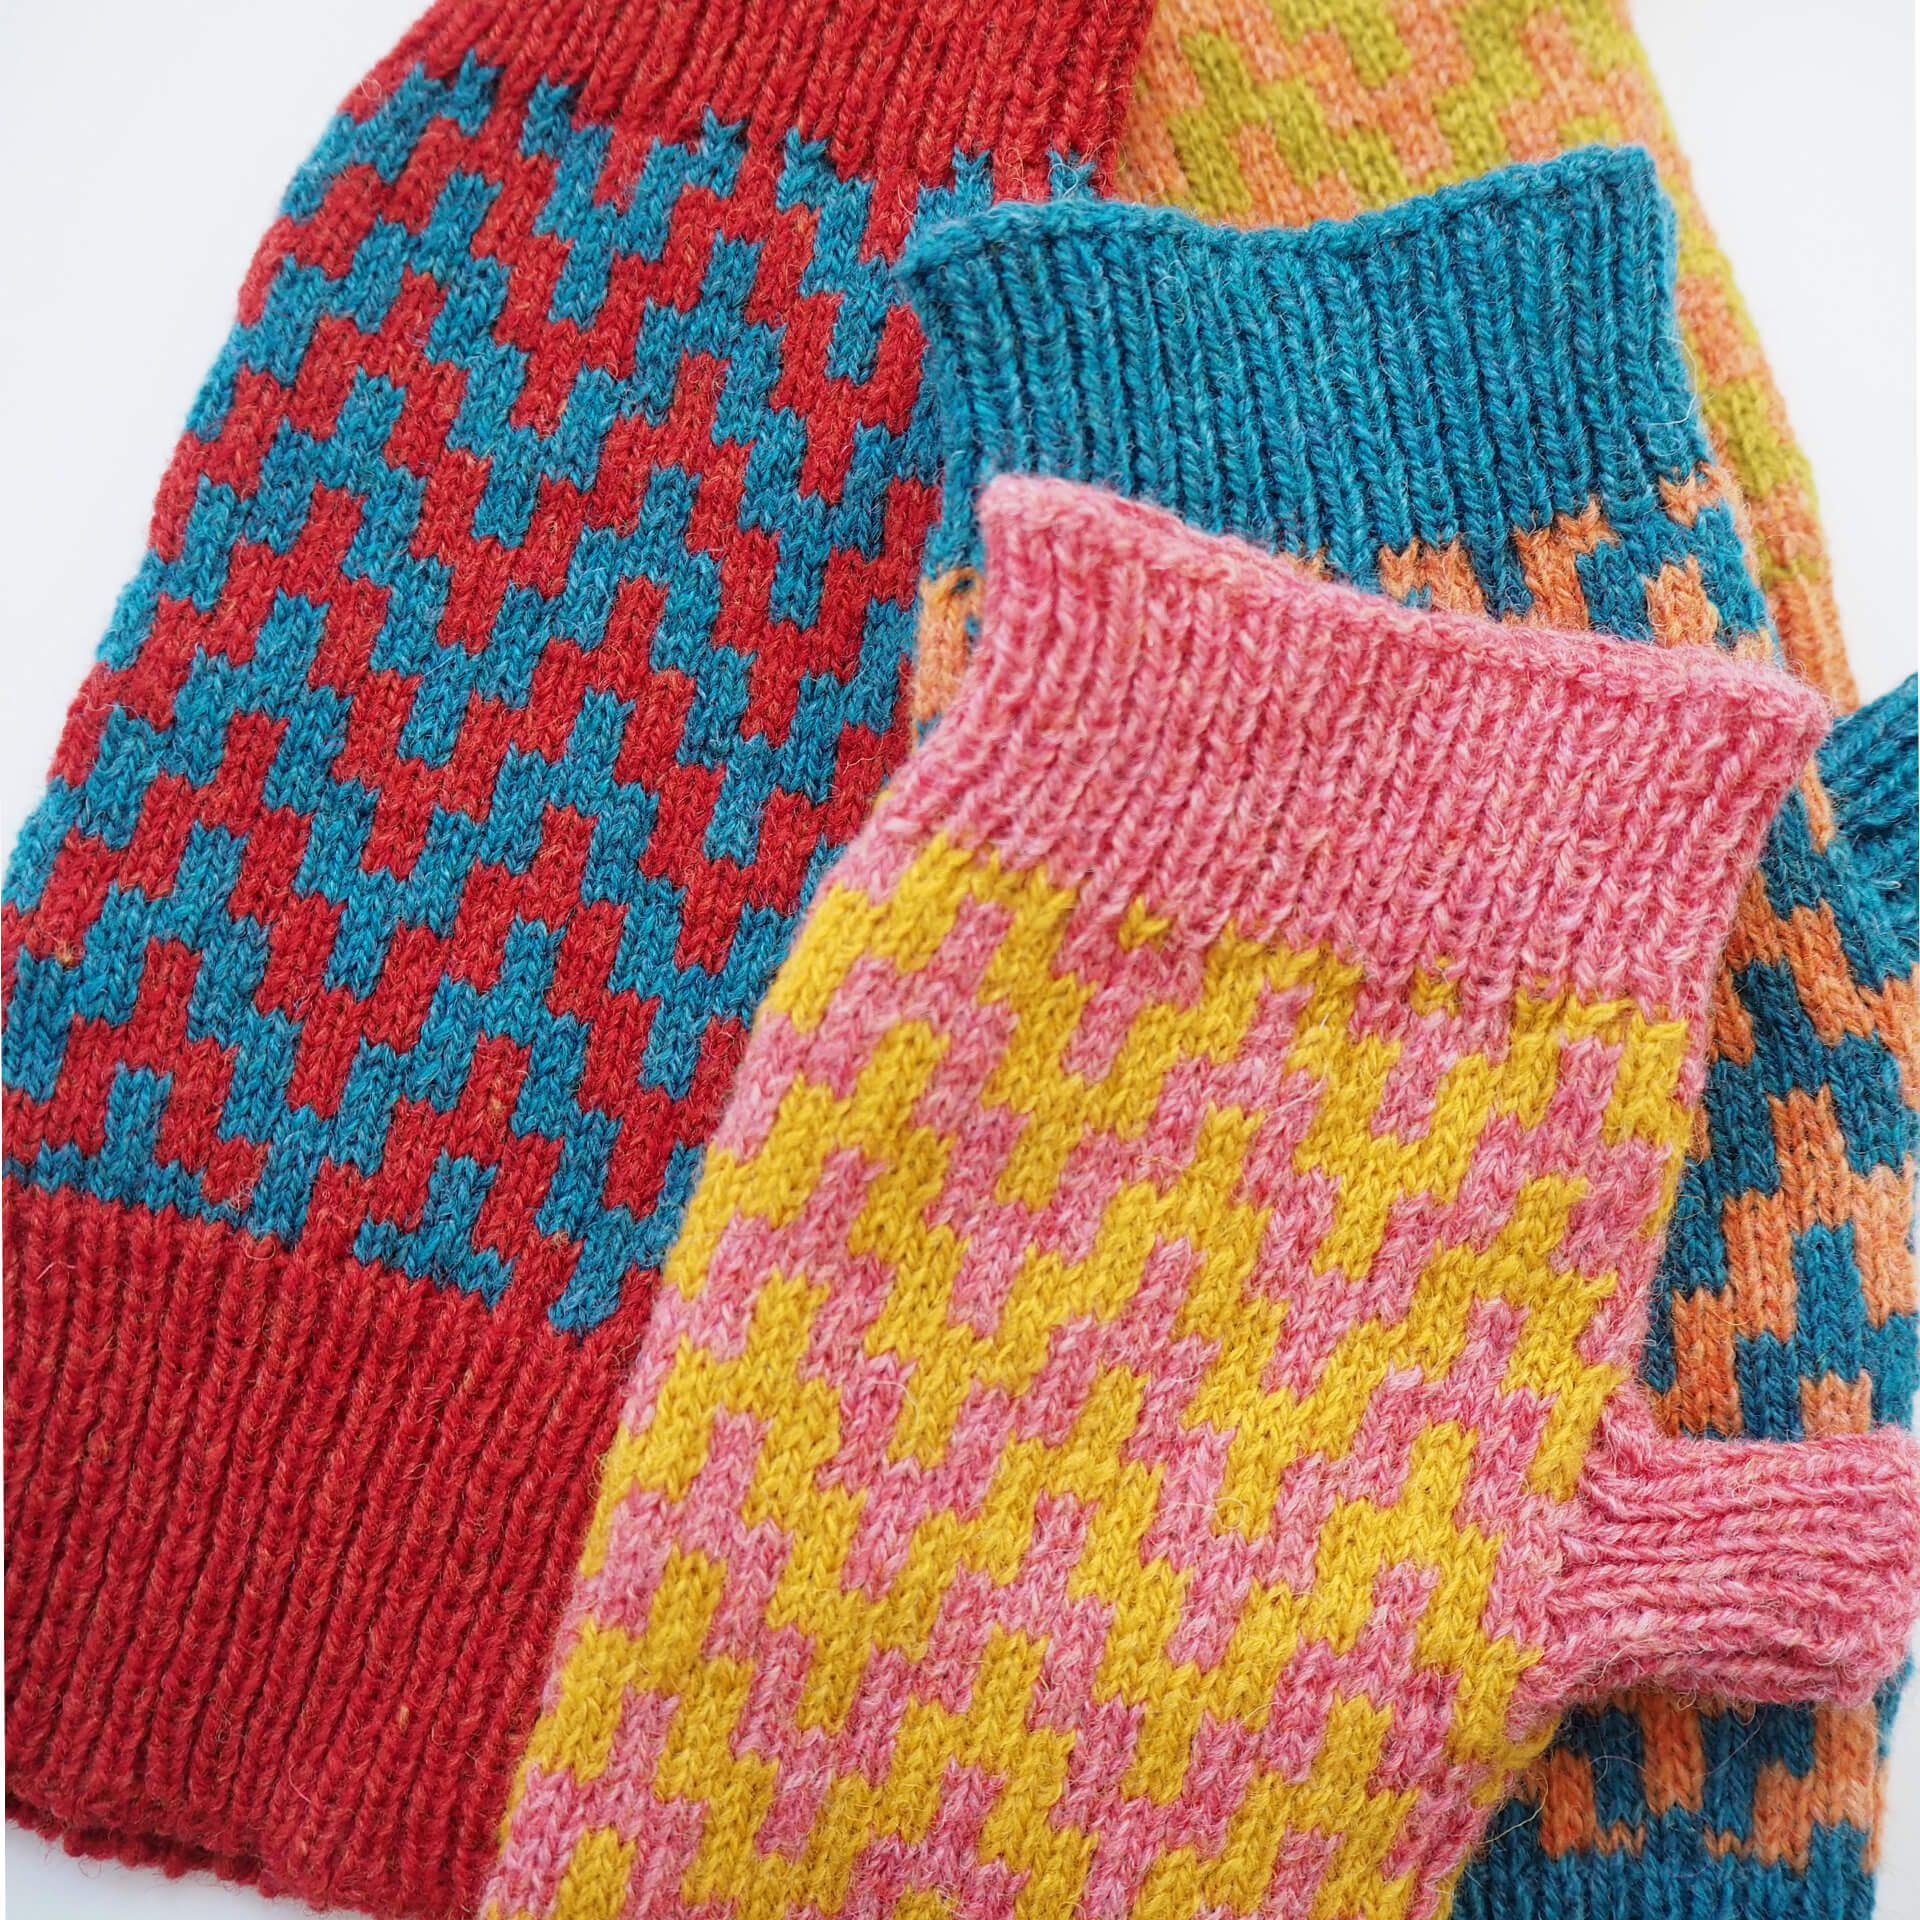 A pile of fingerless gloves by K.Moods. They have a thick zig-zag pattern, and are red, blue, yellow, pink, orange, and lime green.